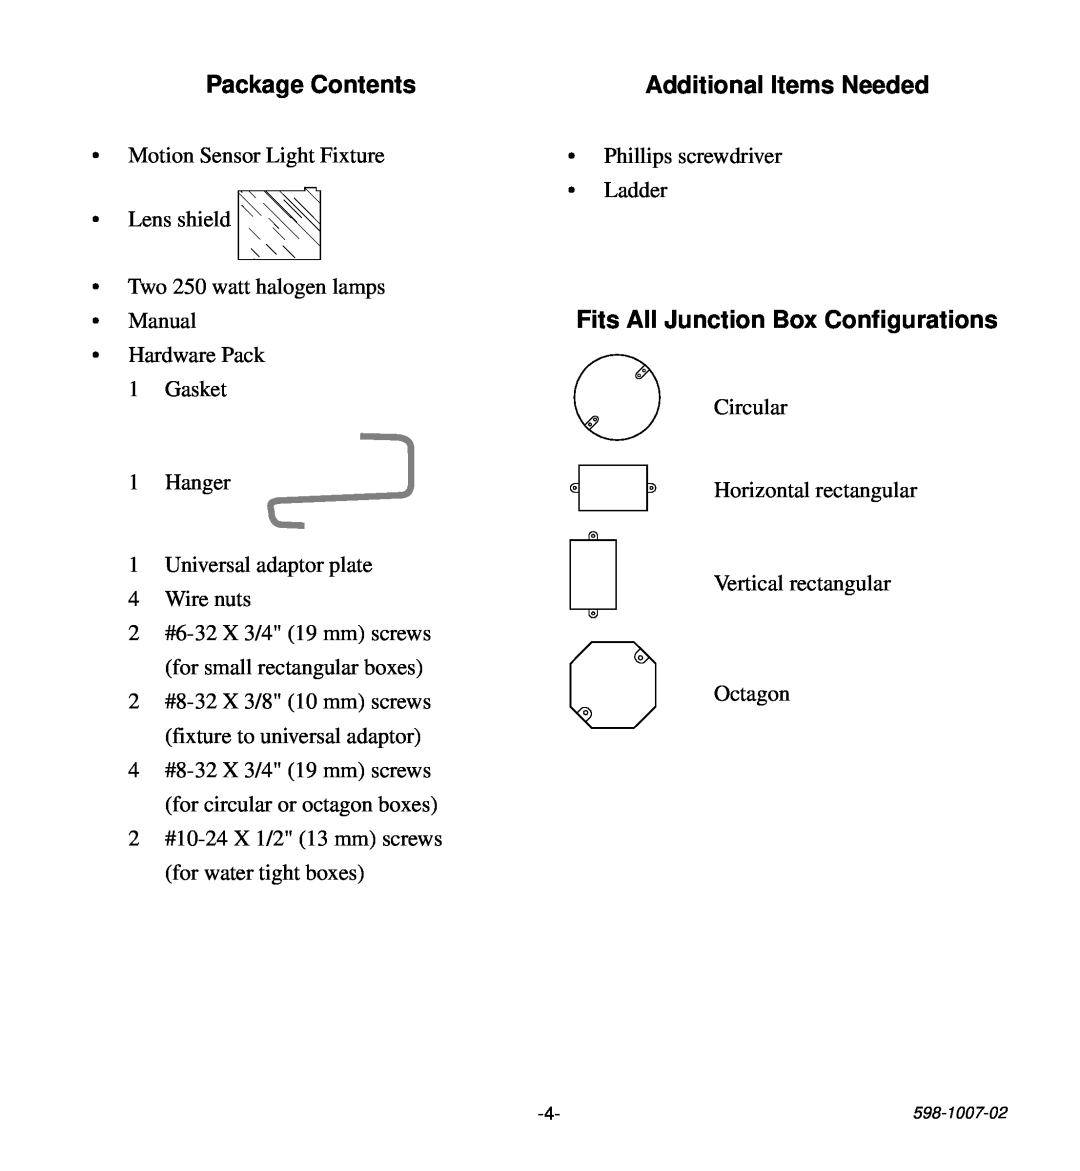 Desa HD-9260 manual Package Contents, Additional Items Needed, Fits All Junction Box Configurations 